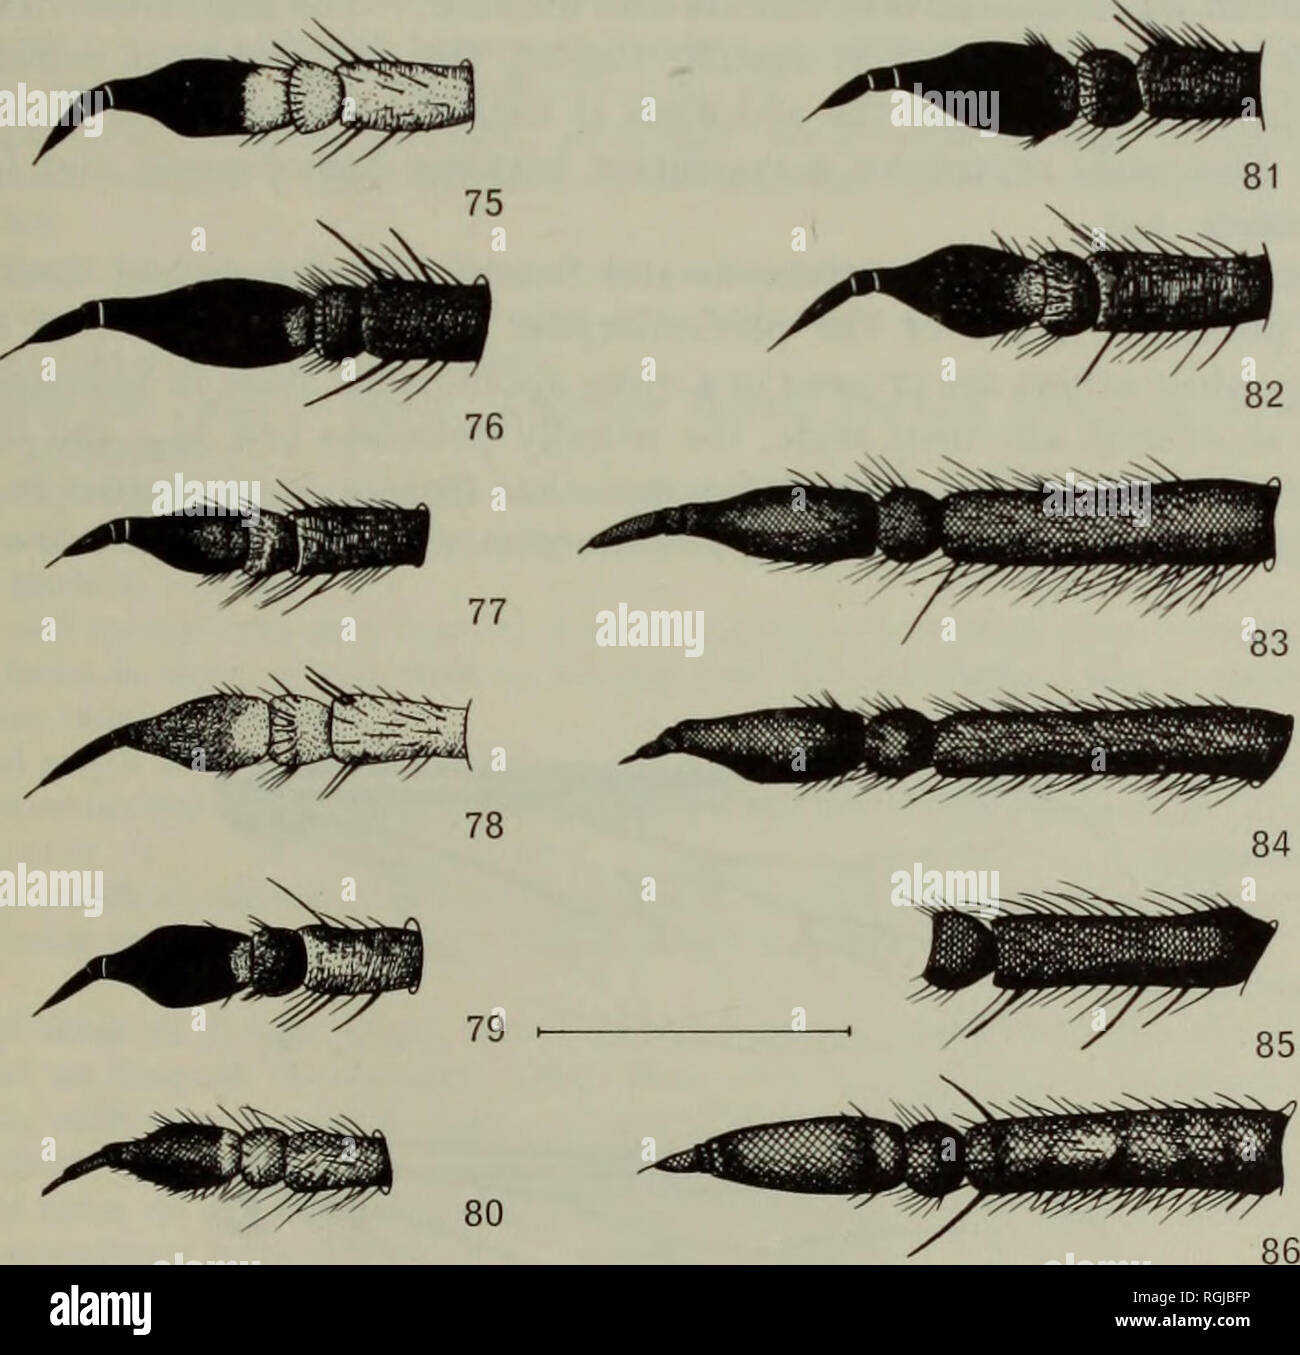 . Bulletin of the British Museum (Natural History) Entomology. THEREVINE STILETTO-FLIES OF THE ETHIOPIAN REGION 221 slightly curved and never forming an apical hook as in Schoutedenomyia. The ventral lobe is specialized in distincta (Text-fig. 133). The hypandrium (Text-fig. 113) is always small, free and situated between ventral bases of gonocoxites. The aedeagus is free, and is basically long and slender in shape, with the phallic part only slightly curved (sole exception: ostentata (Text- fig. 92)). The dorsal apodeme may be totally reduced as in distincta, but is usually 2 to 3 times as wi Stock Photo